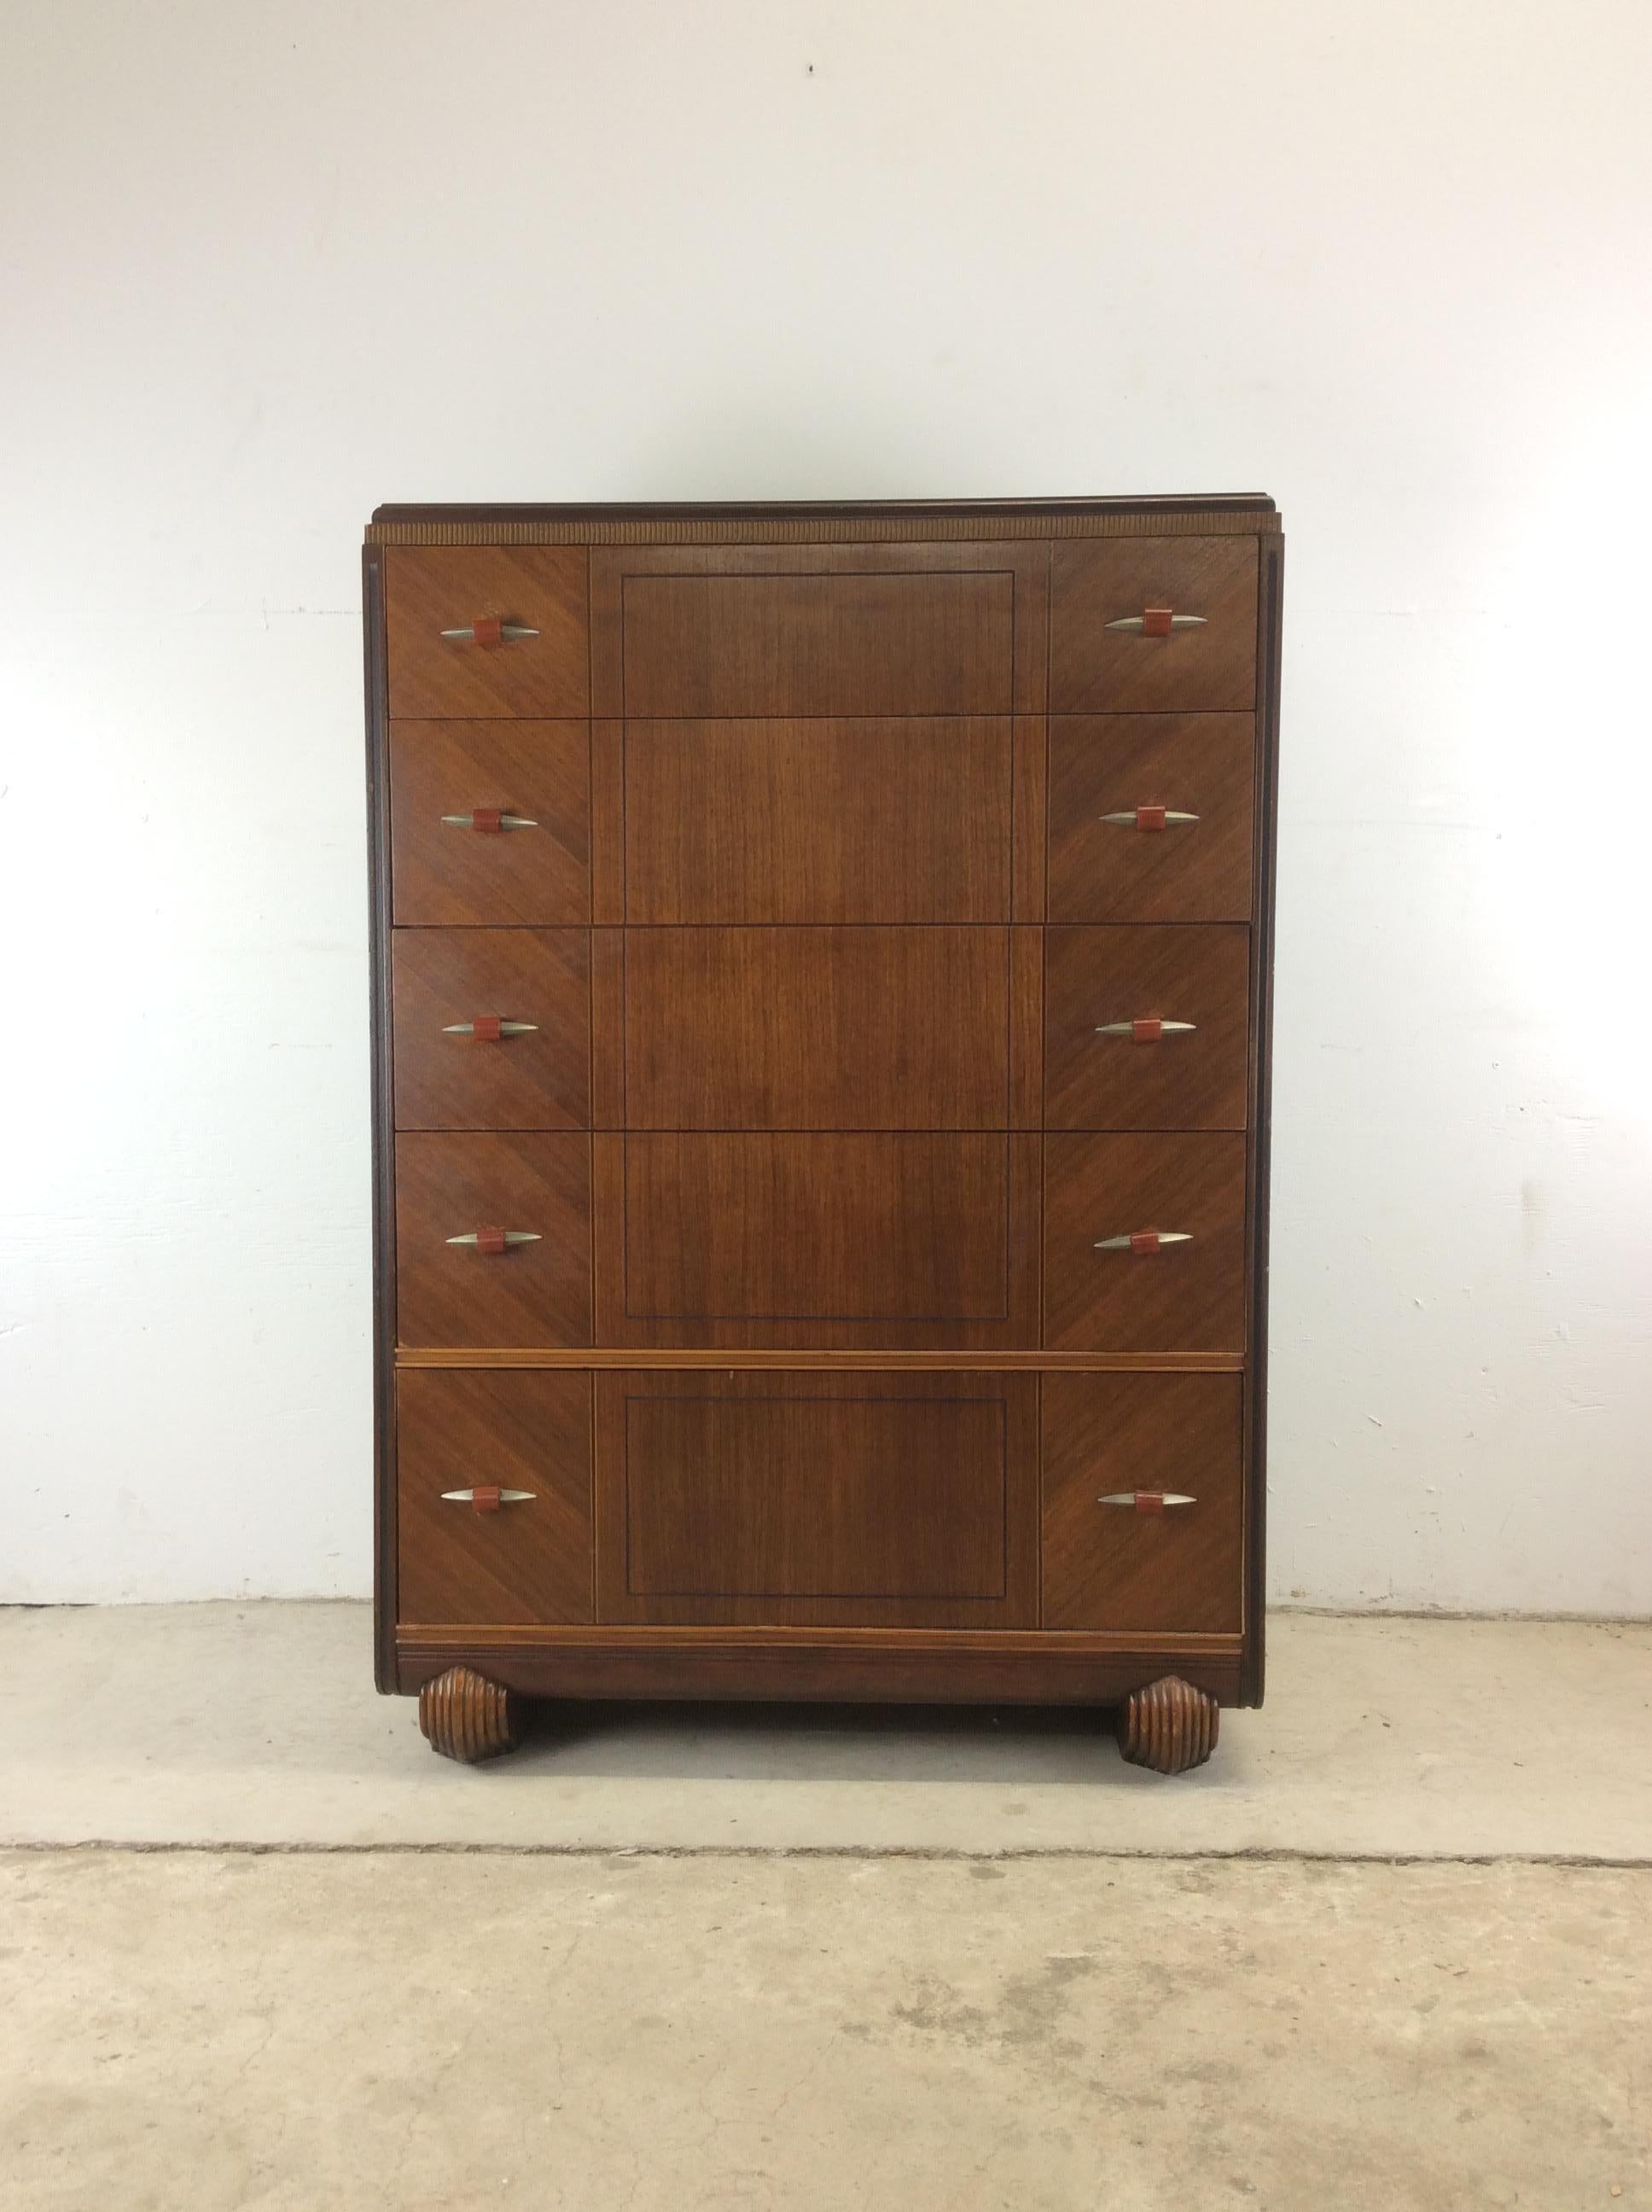 This antique Art Deco style highboy features original walnut finish with unique wood grain, detailed trim along the top edges, chrome hardware with bakelite, and unique carved feet.

Matching mirrored vanity, chest of drawers with mirror and single